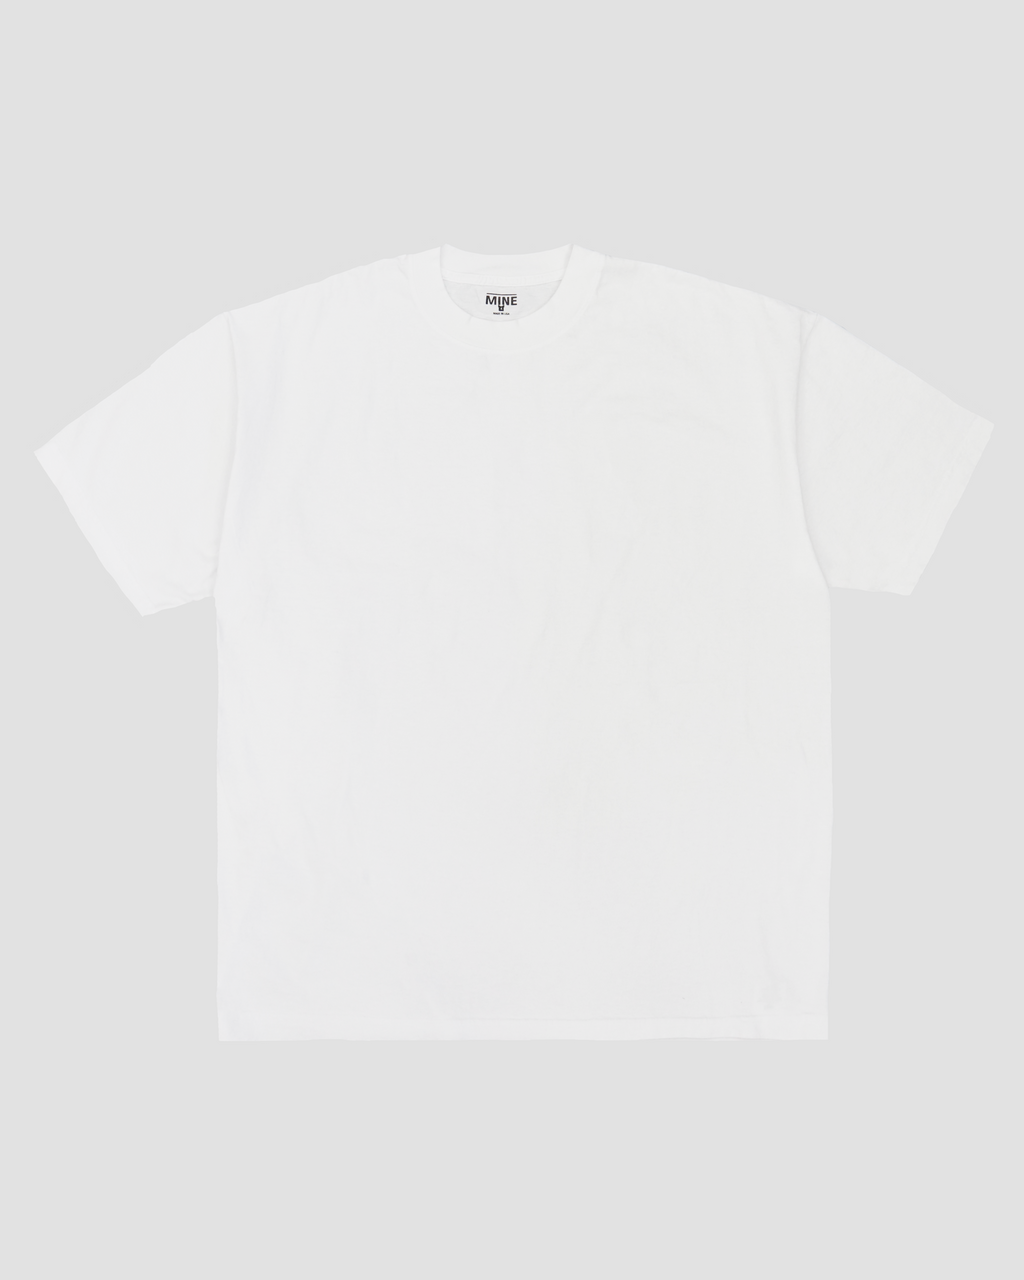 MINE Duct Tape Tee / White Label - White